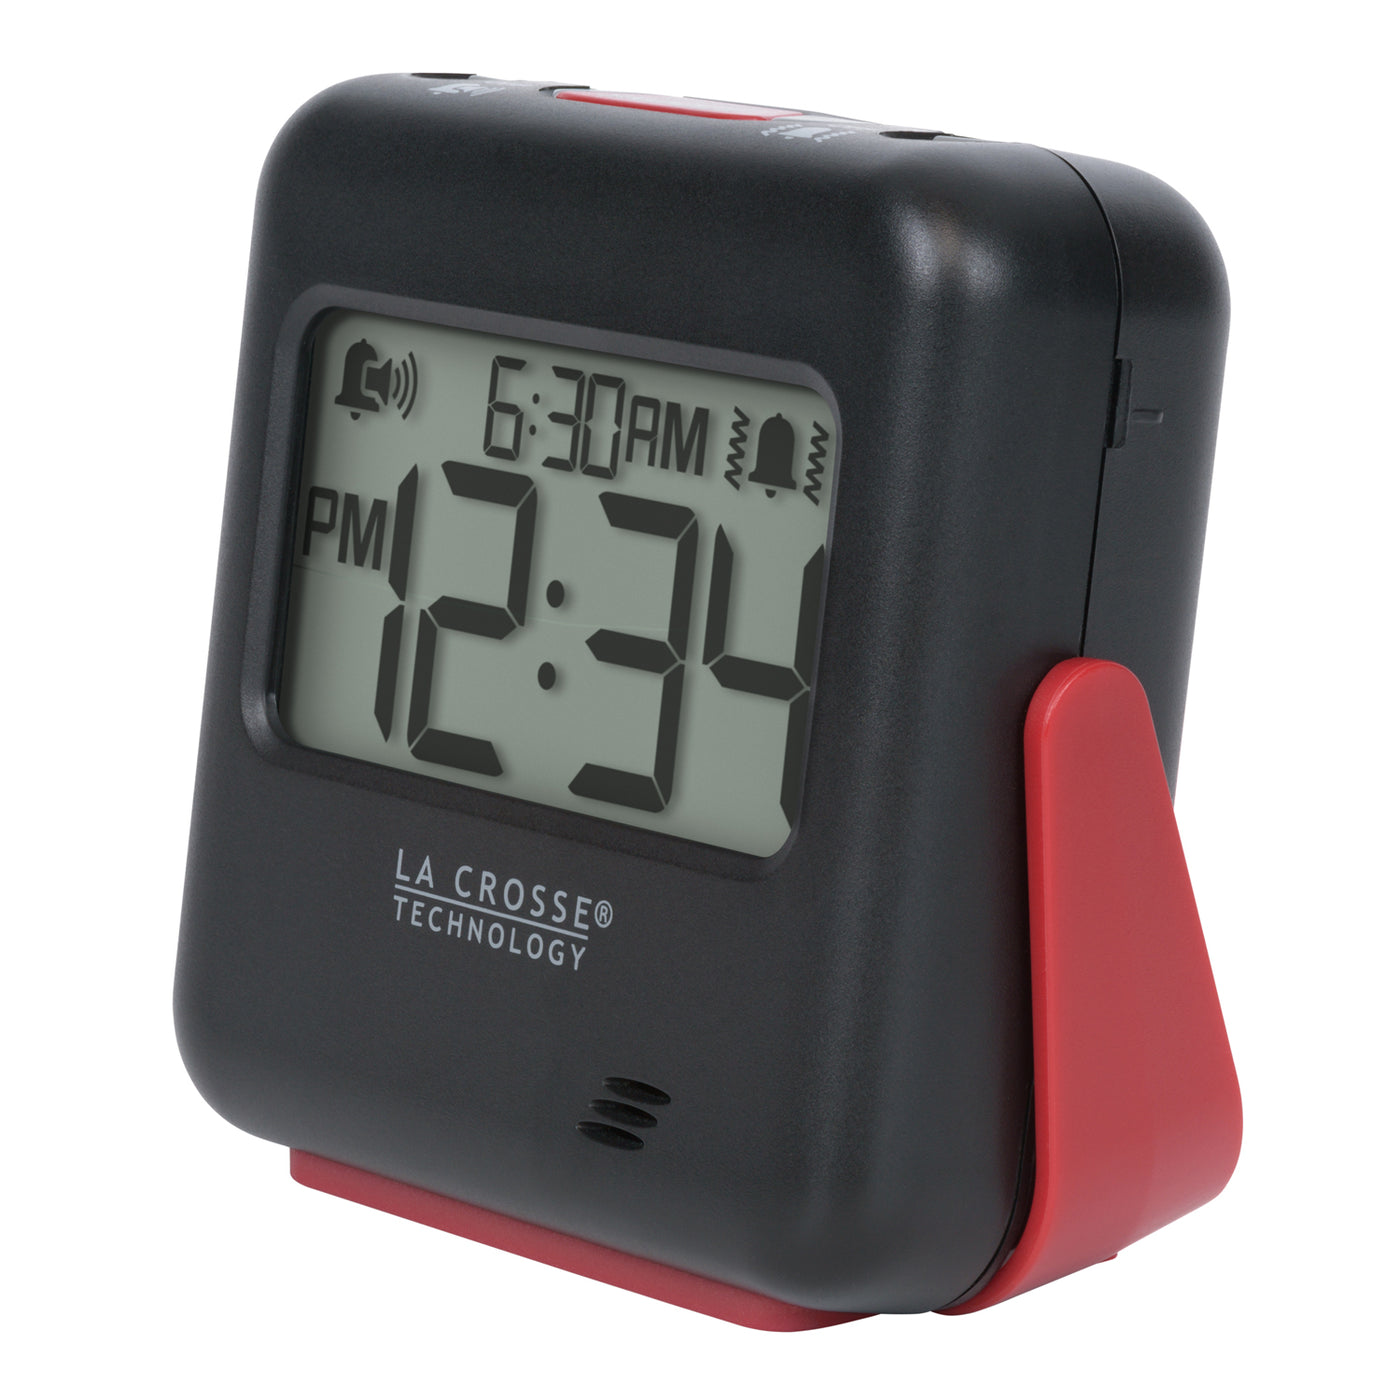 617-147 Buzz Digital Alarm Clock with Vibration and Loud Sound